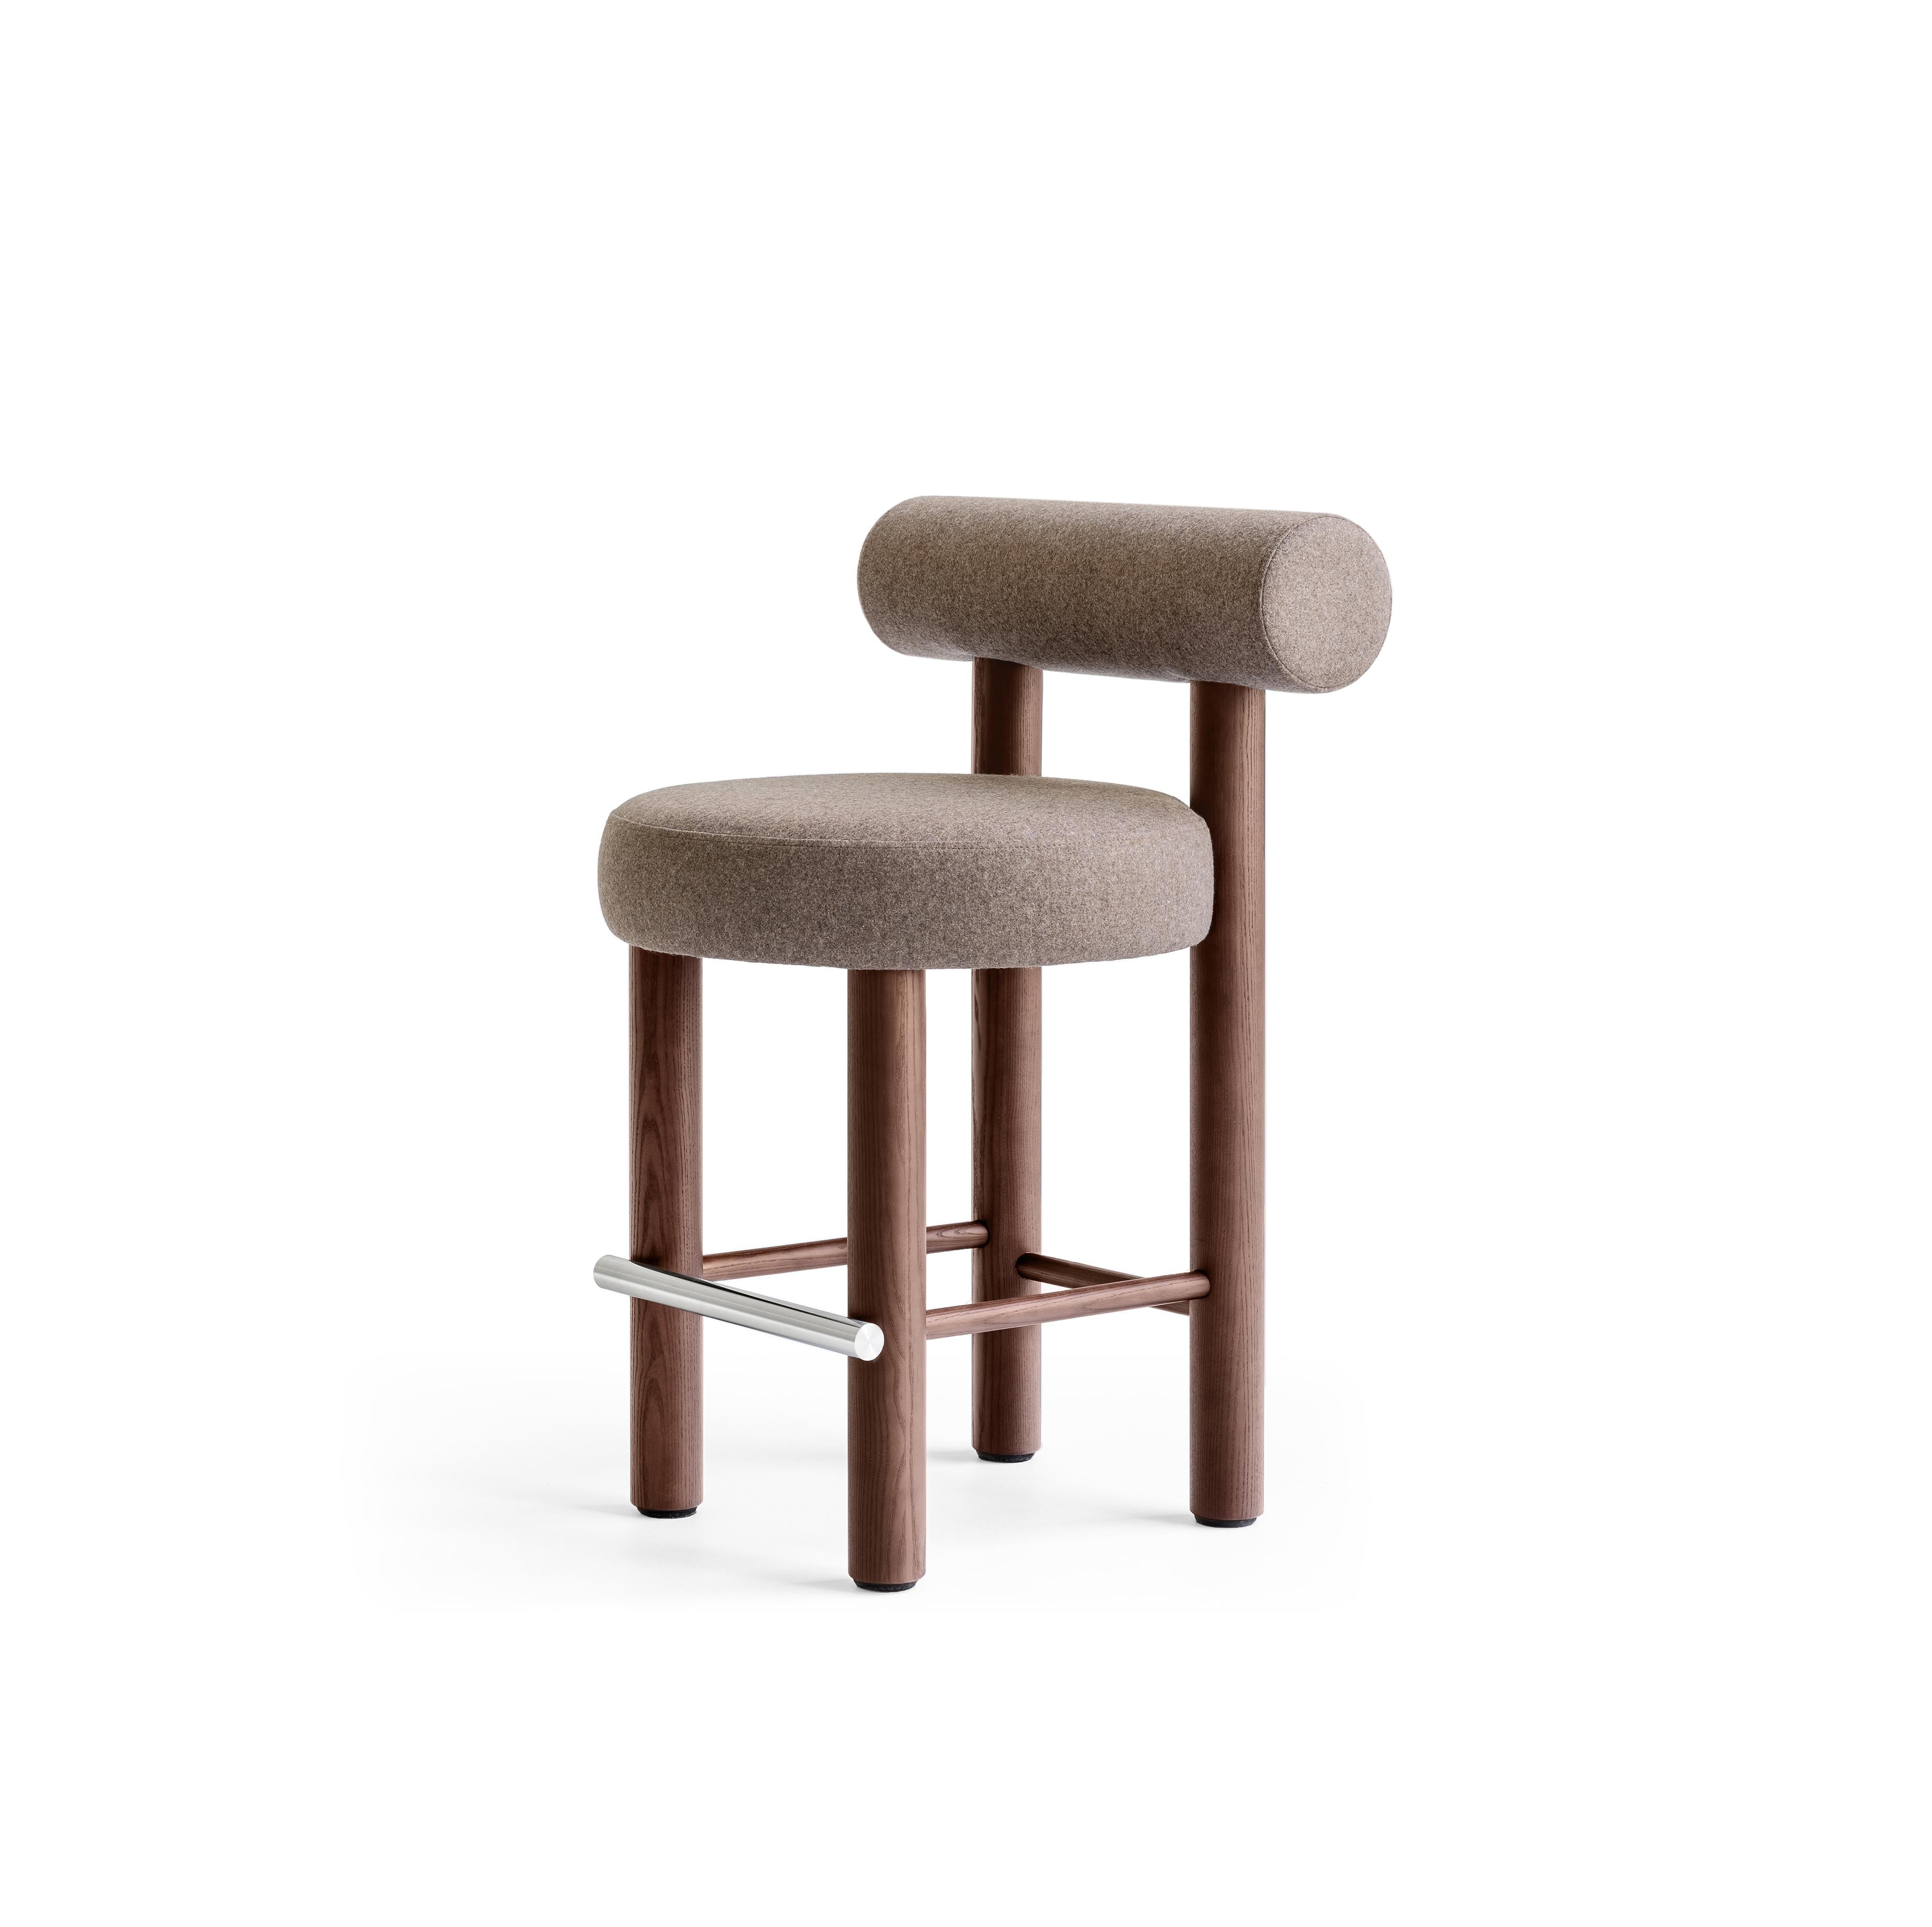 Modern Counter Chair Gropius CS2/65 in Wool Fabric with Wooden Legs by Noom 9